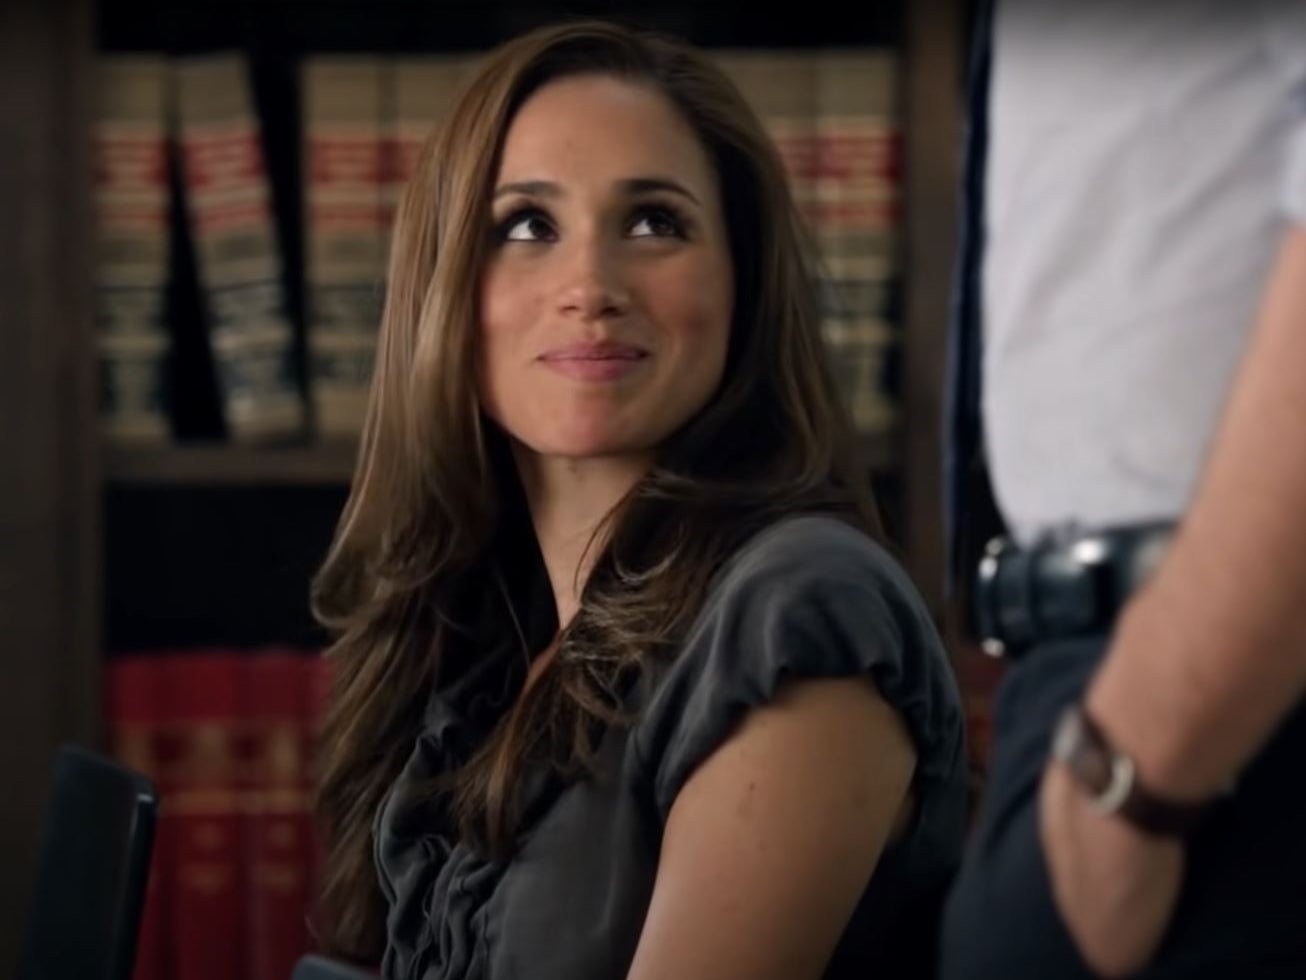 Meghan Markle in the US legal drama Suits